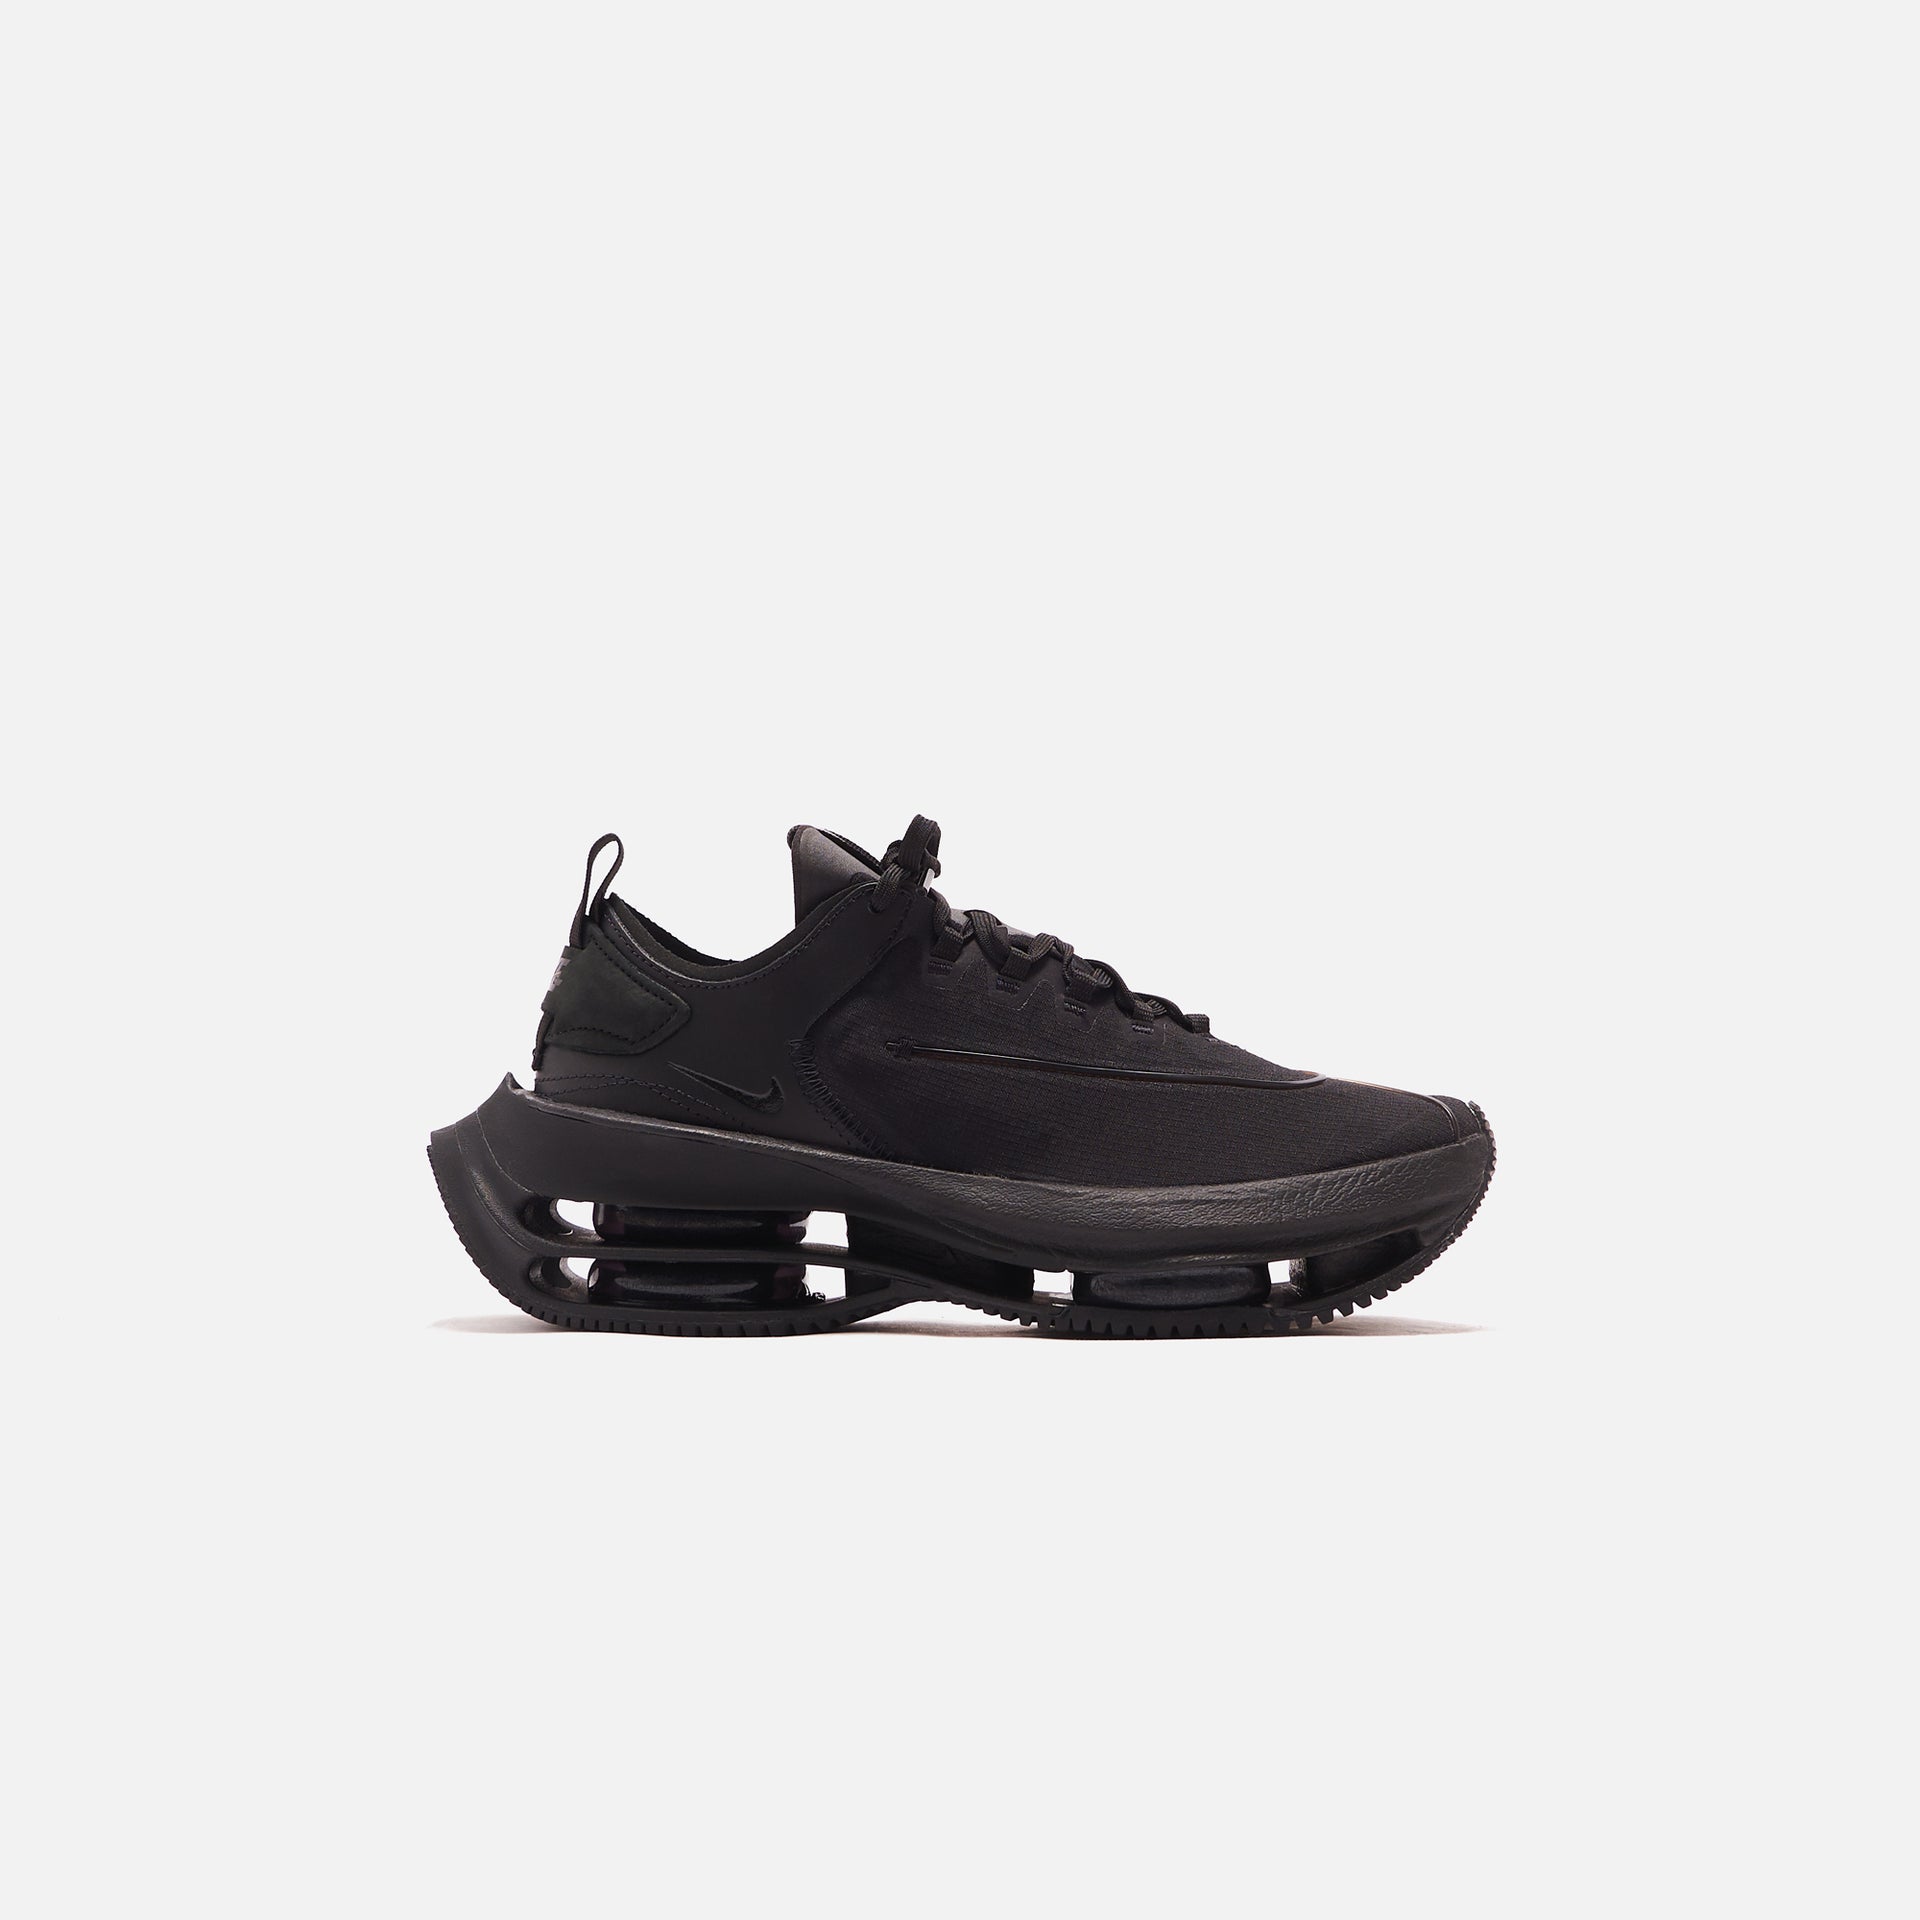 Nike WMNS Zoom Double Stacked HO20 - Black